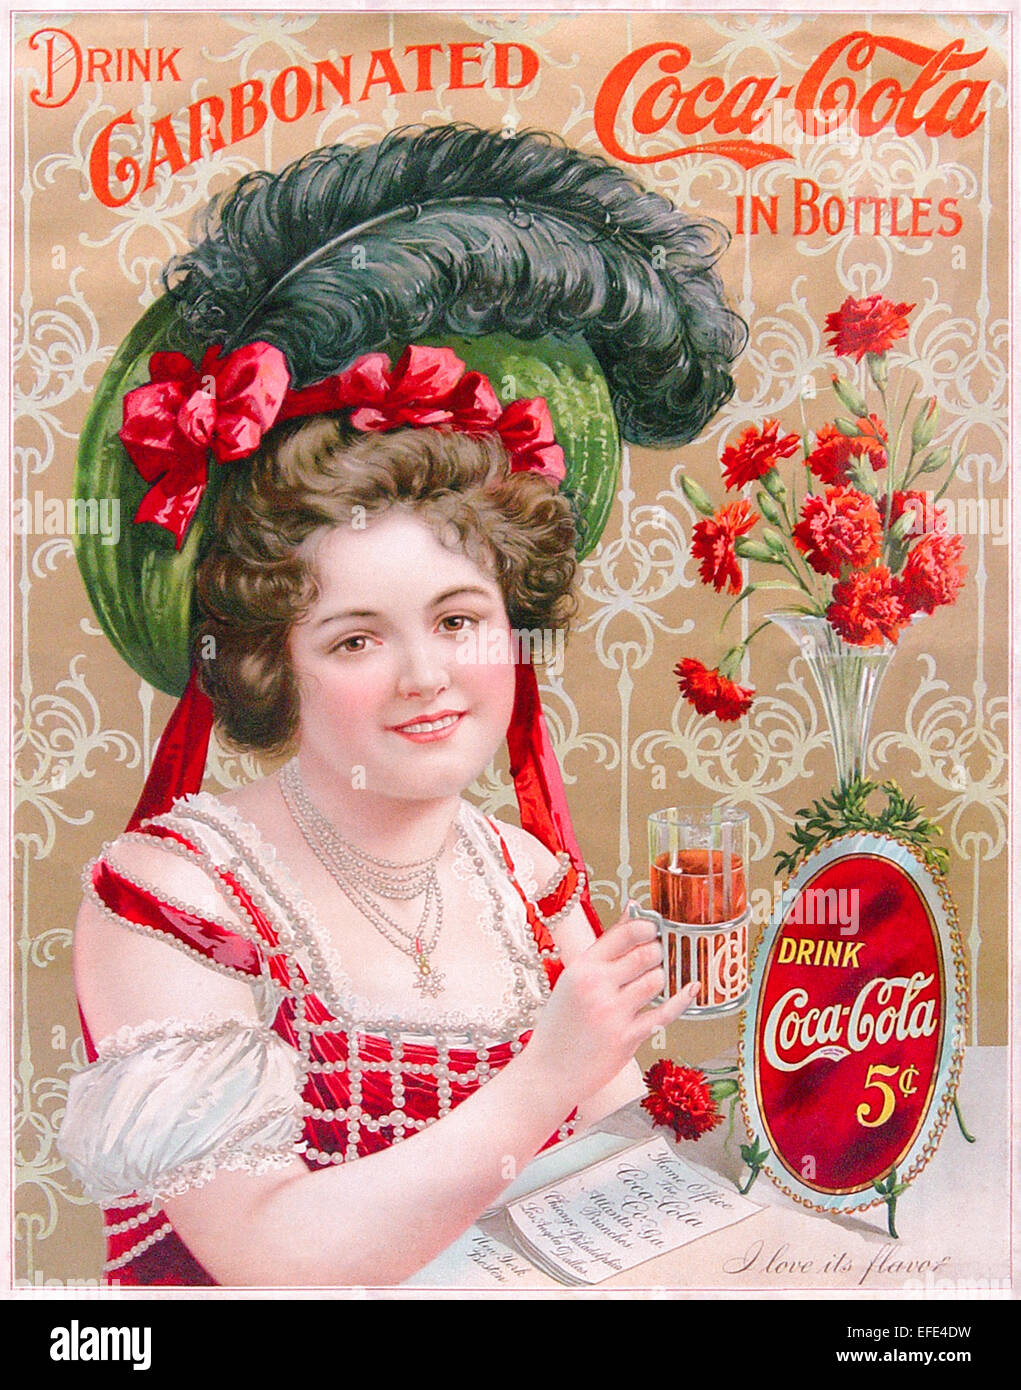 'Drink Coca-Cola 5¢' 1902 Coca-Cola advertisement featuring Hilda Clark (1872-1932) who appeared in various adverts between 1899-1903. At the time Coca-Cola contained cocaine (coca) as well as caffeine from kola nuts. See description for more information. Stock Photo